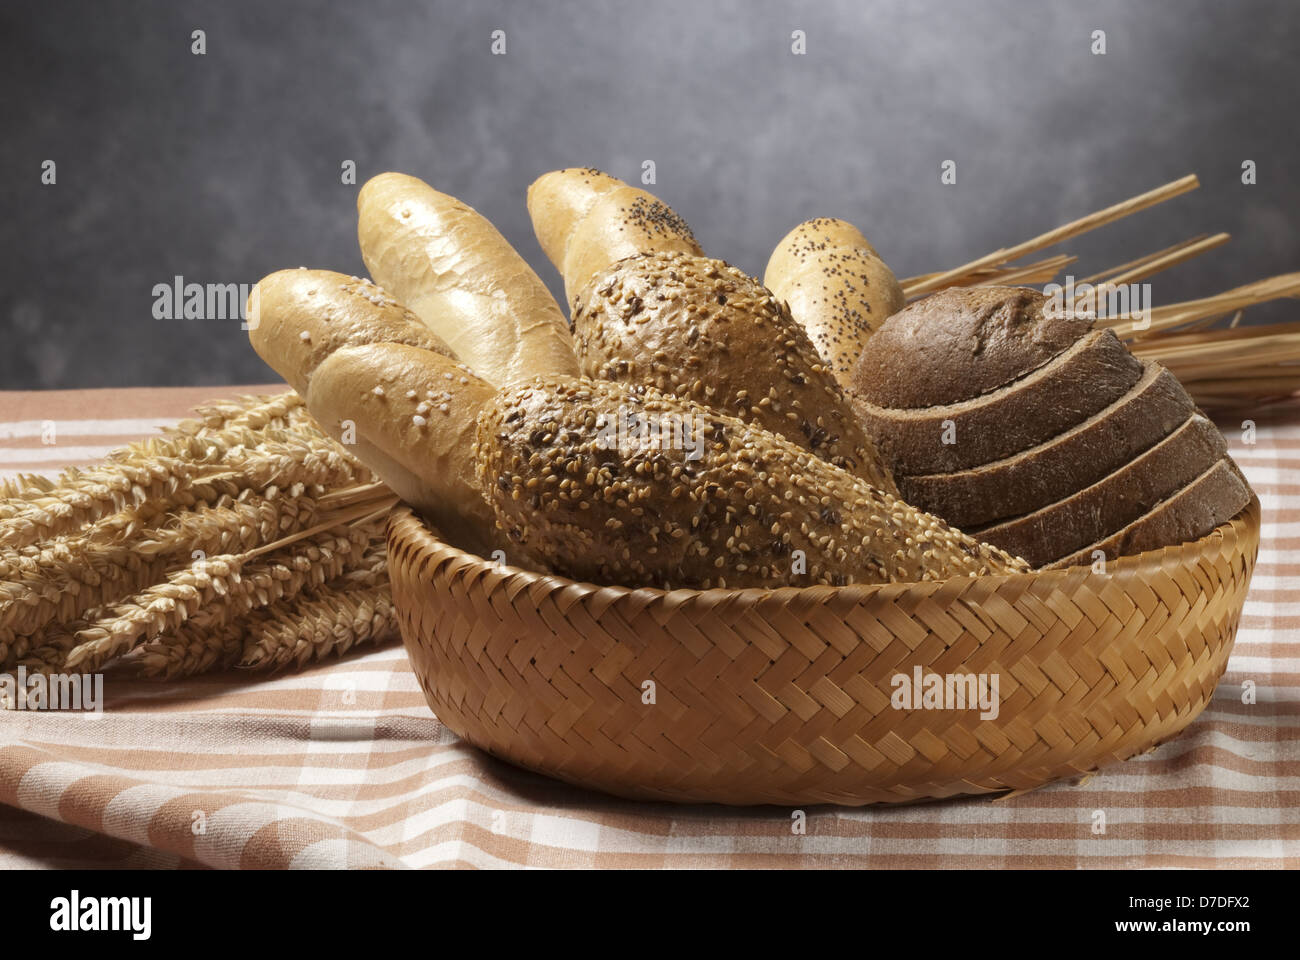 bakery products Stock Photo